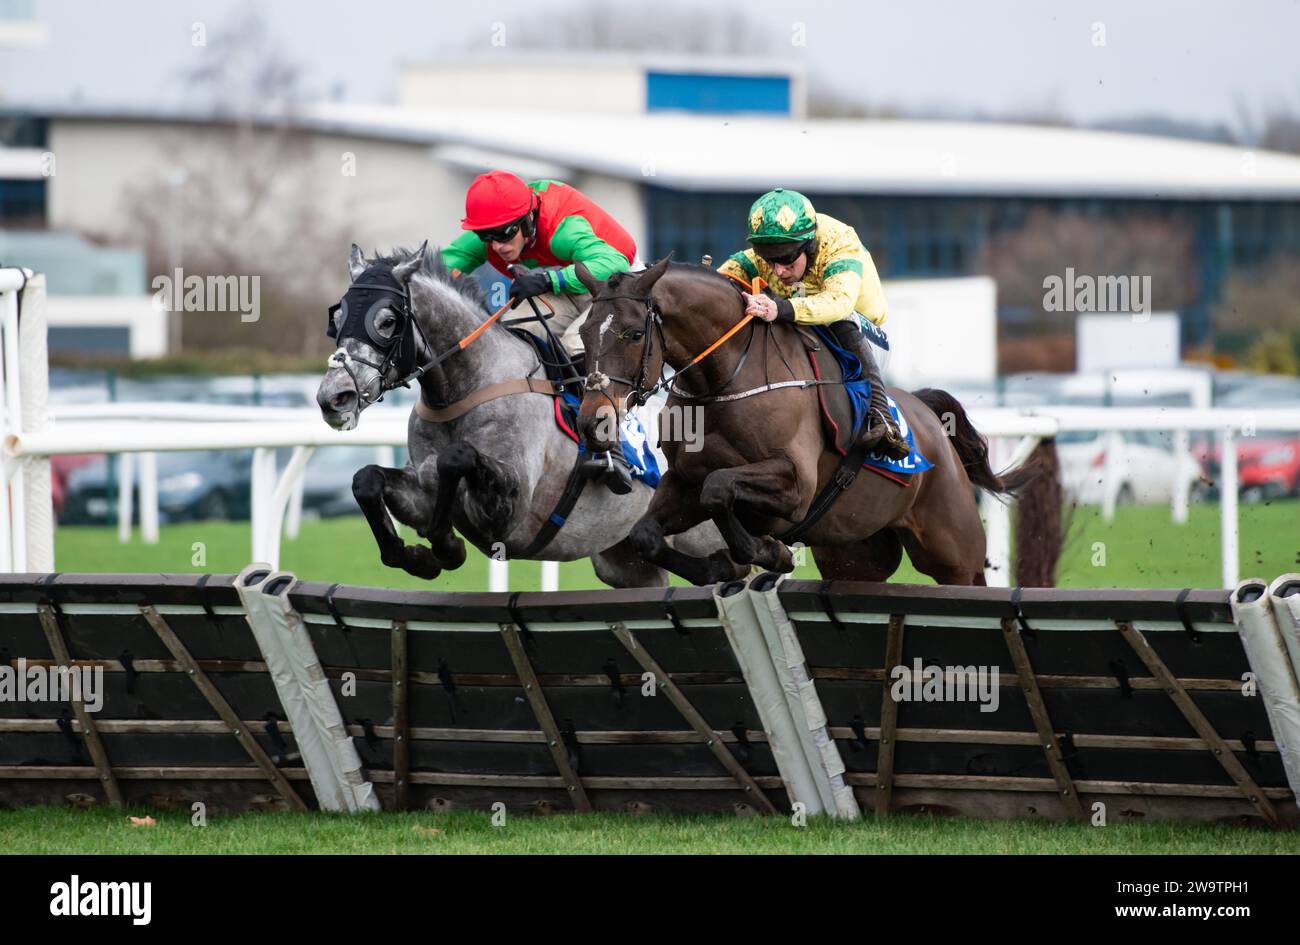 Rambo T and Gavin Sheehan win the Coral Racing Club Join For Free Handicap Hurdle for trainer Olly Murphy and owners MPB Contractors Limited. Credit: JTW Equine Images/ Alamy Live News Stock Photo